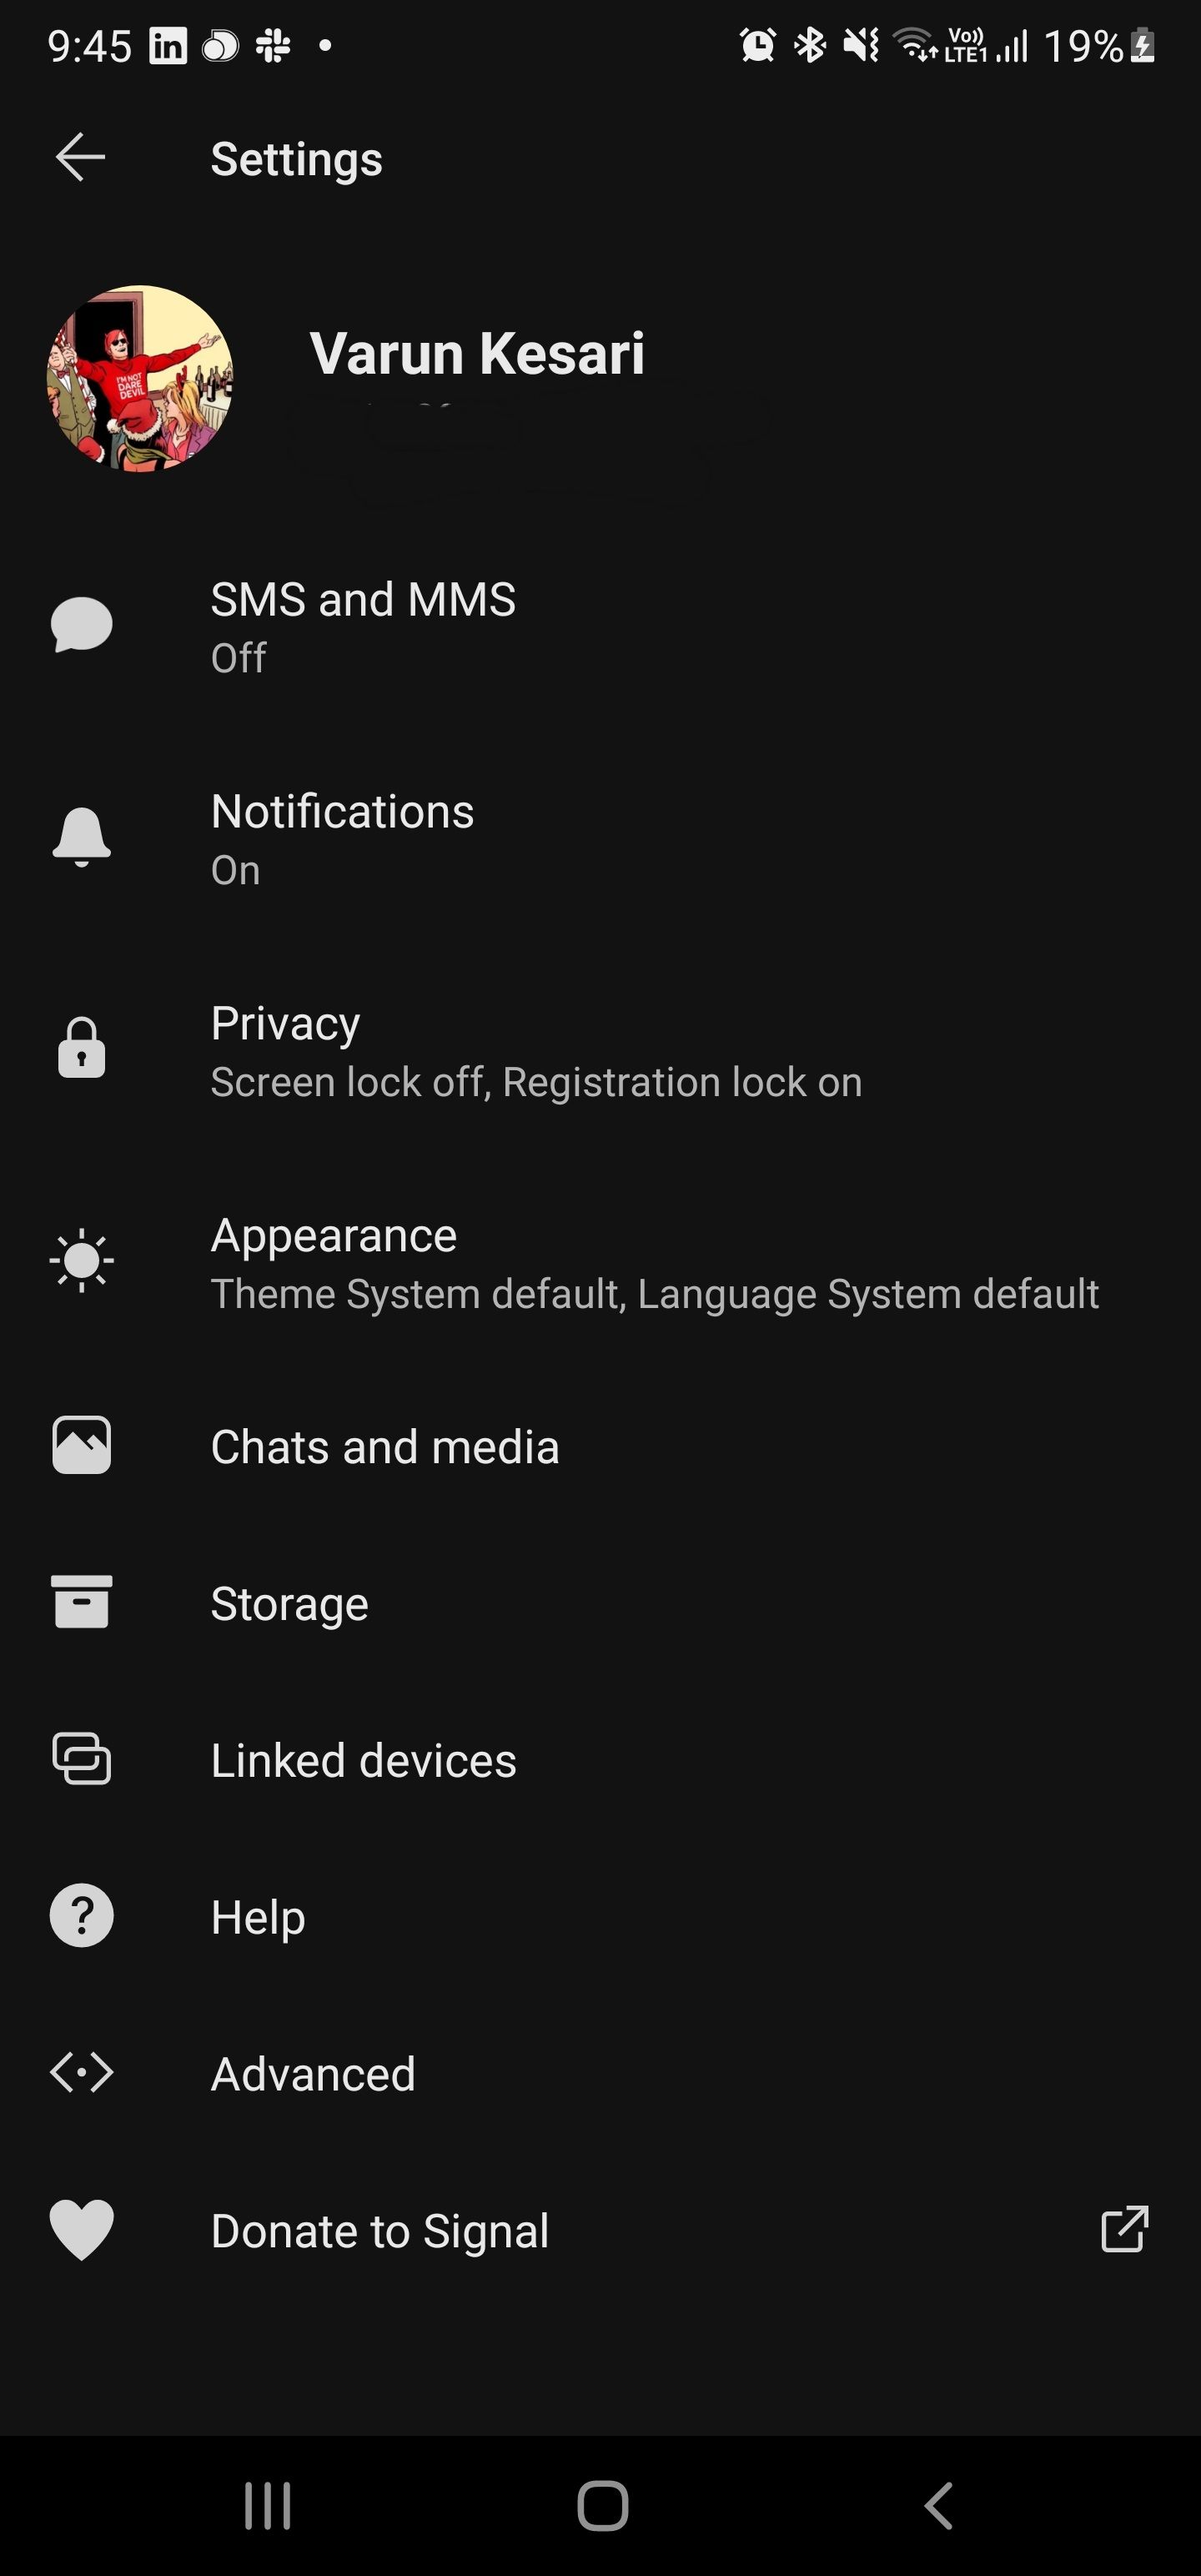 signal privacy settings